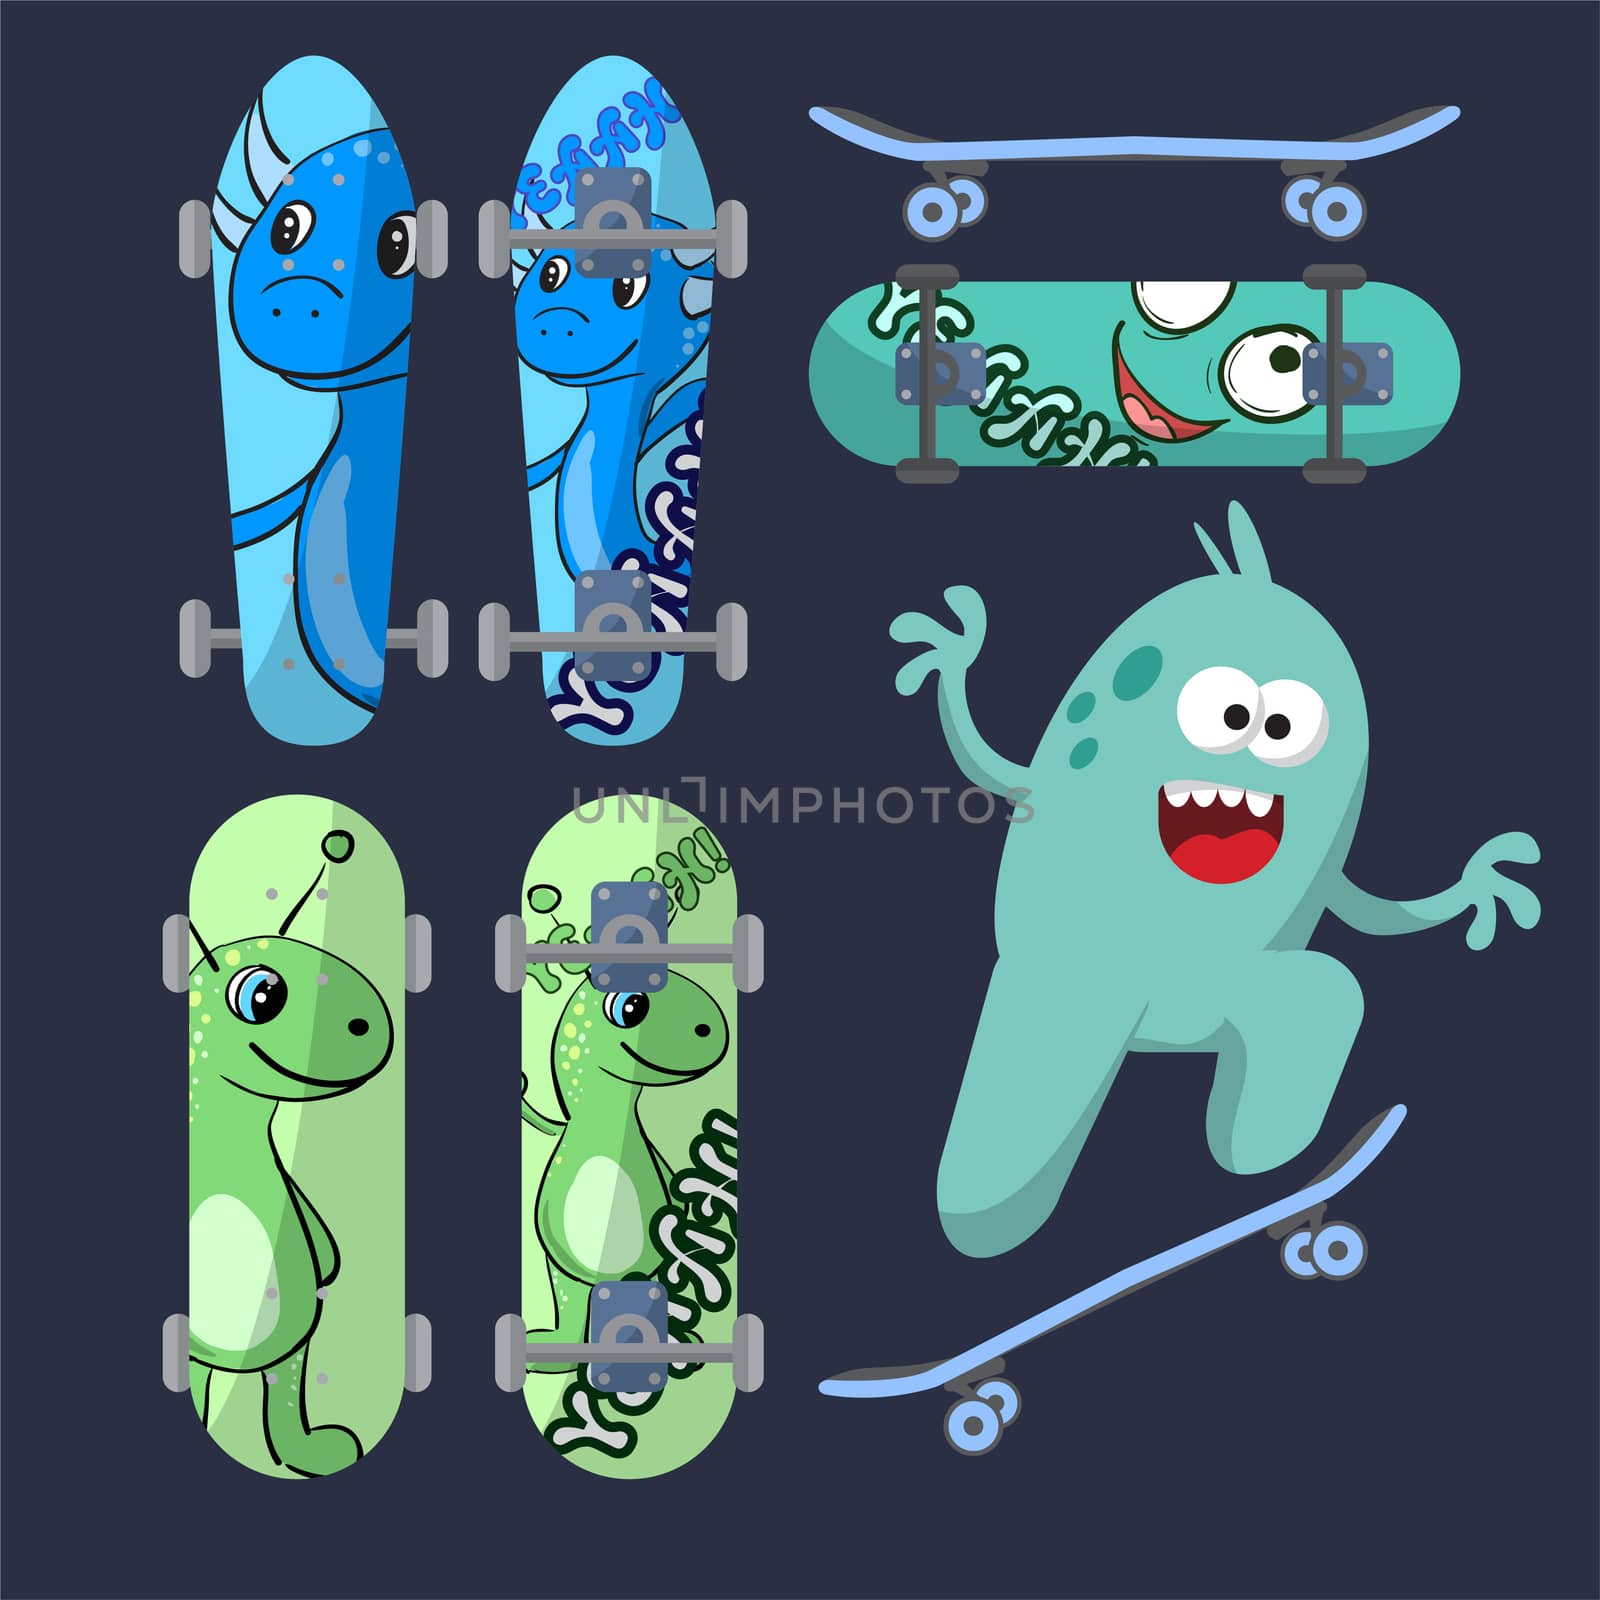 Bright skateboard on a dark background with a cheerful light green monster. by Adamchuk